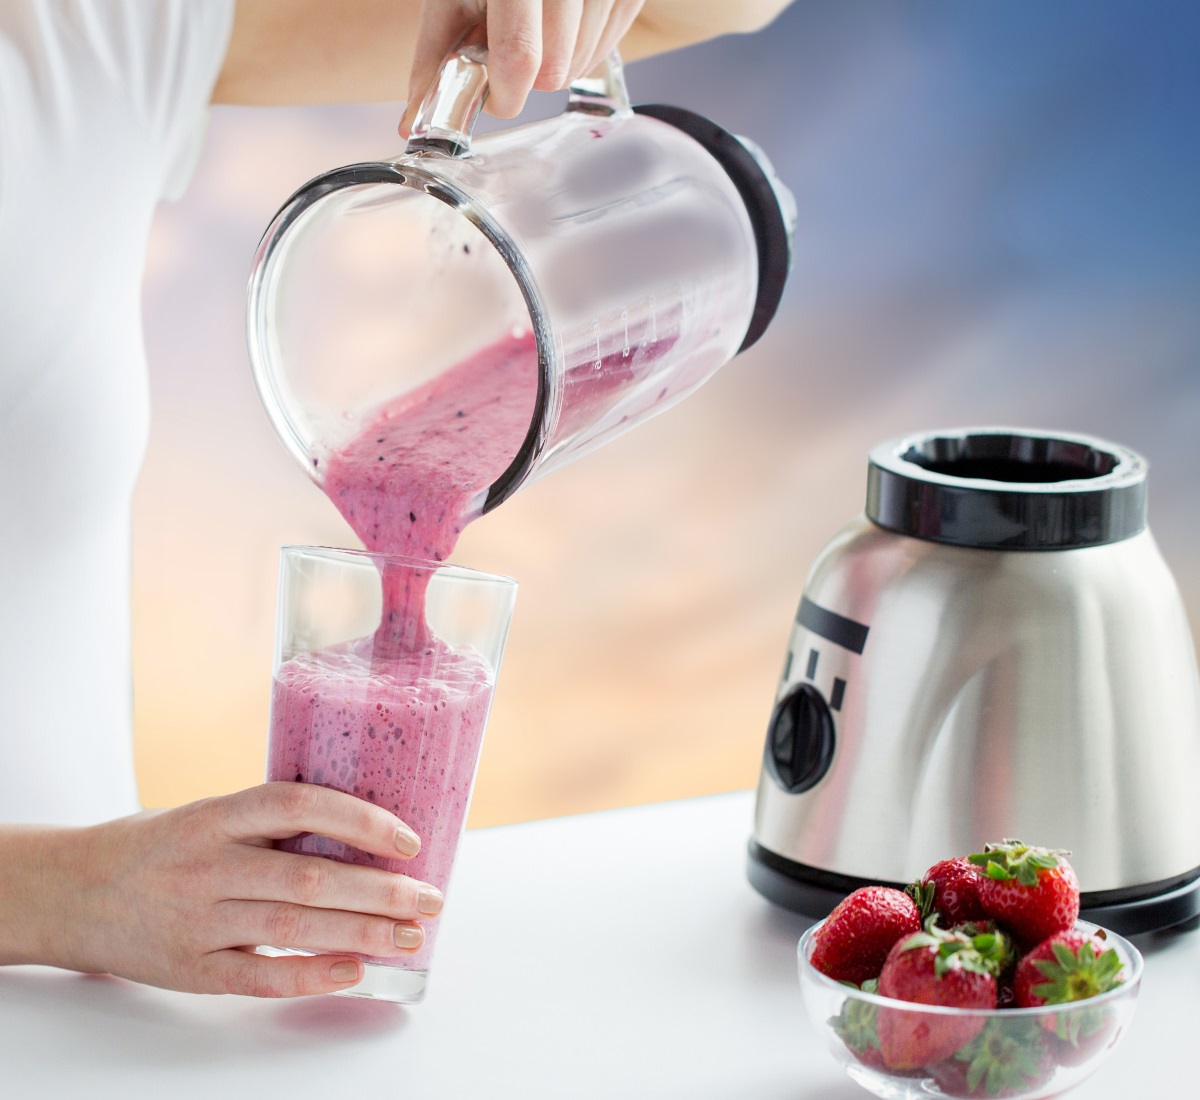 La Reveuse Personal Size Blender 250 Watts Power for Shakes